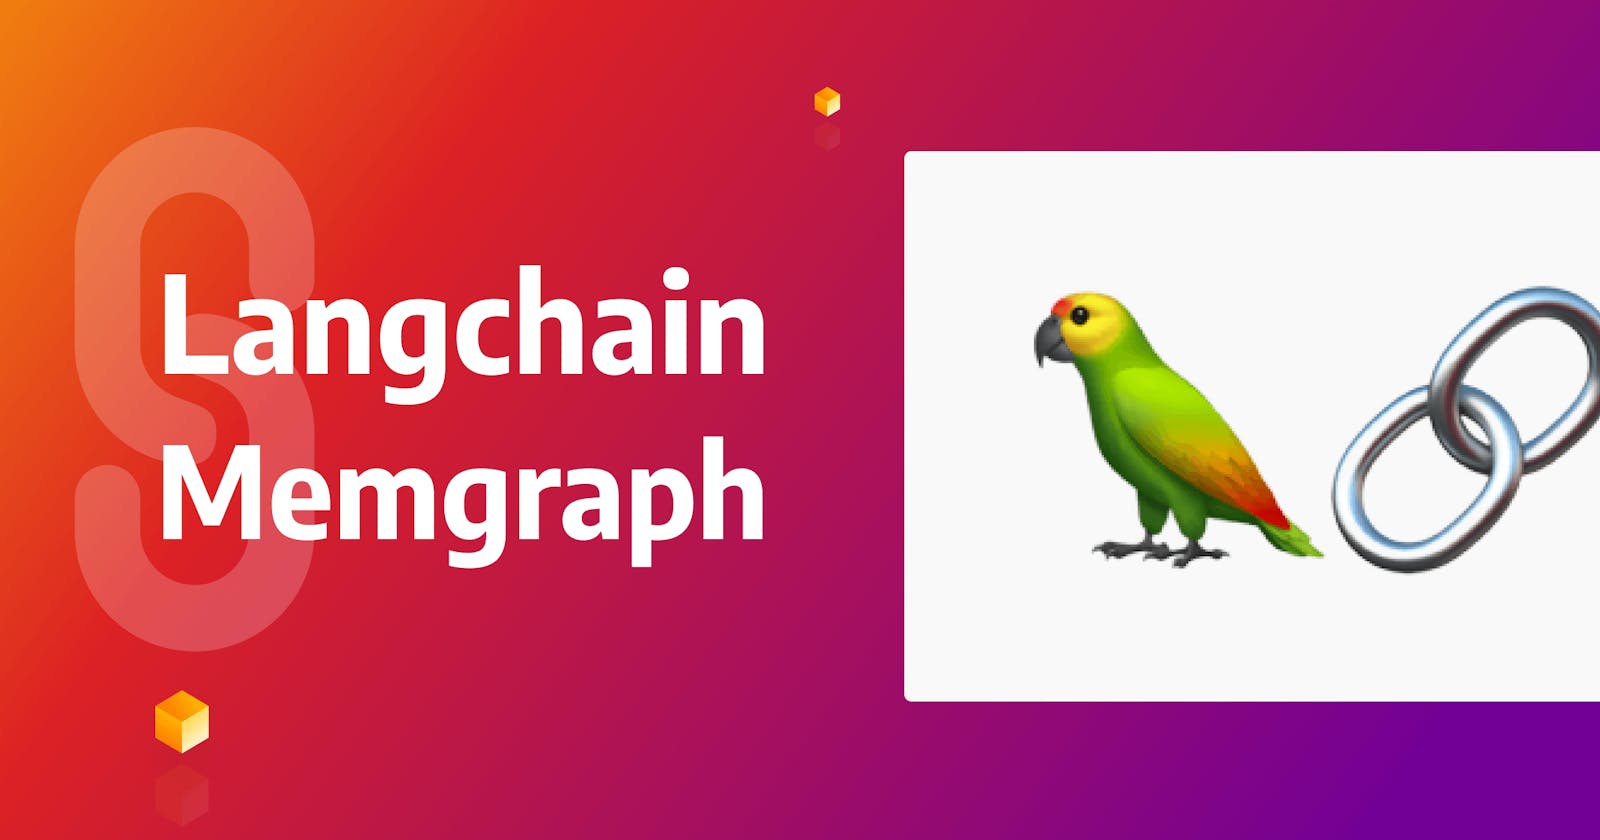 Exciting News: LangChain Now Supports Memgraph!